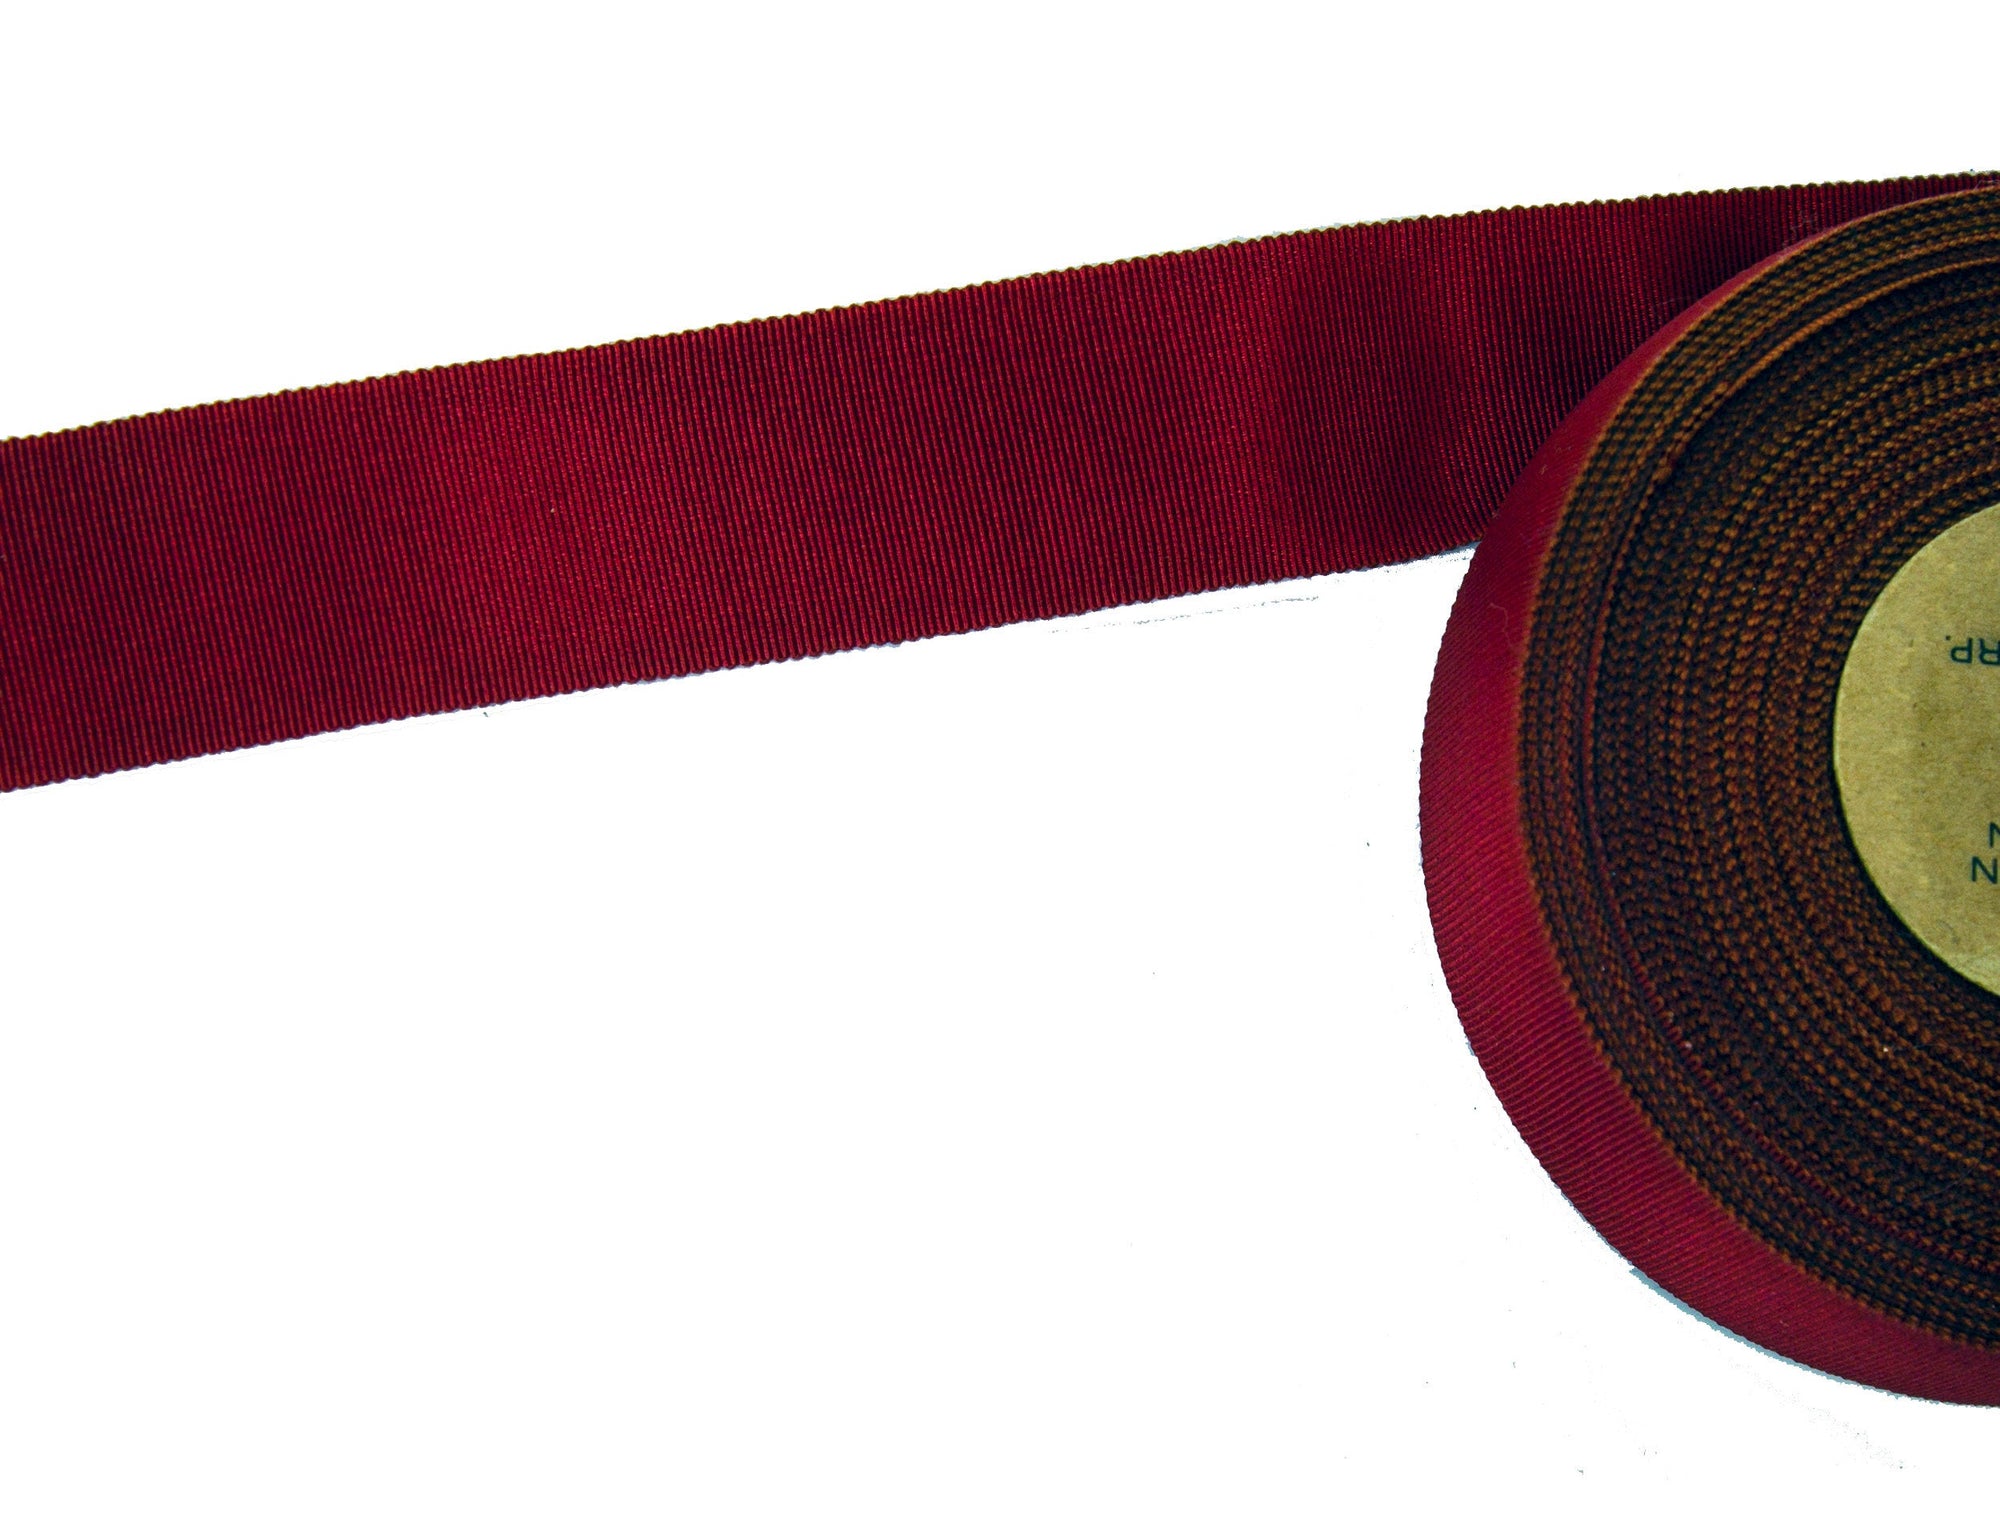 Vintage Petersham Ribbon Wine Red 50/50 Cotton Rayon Measures 35 mm Wide - Sold by the Yard